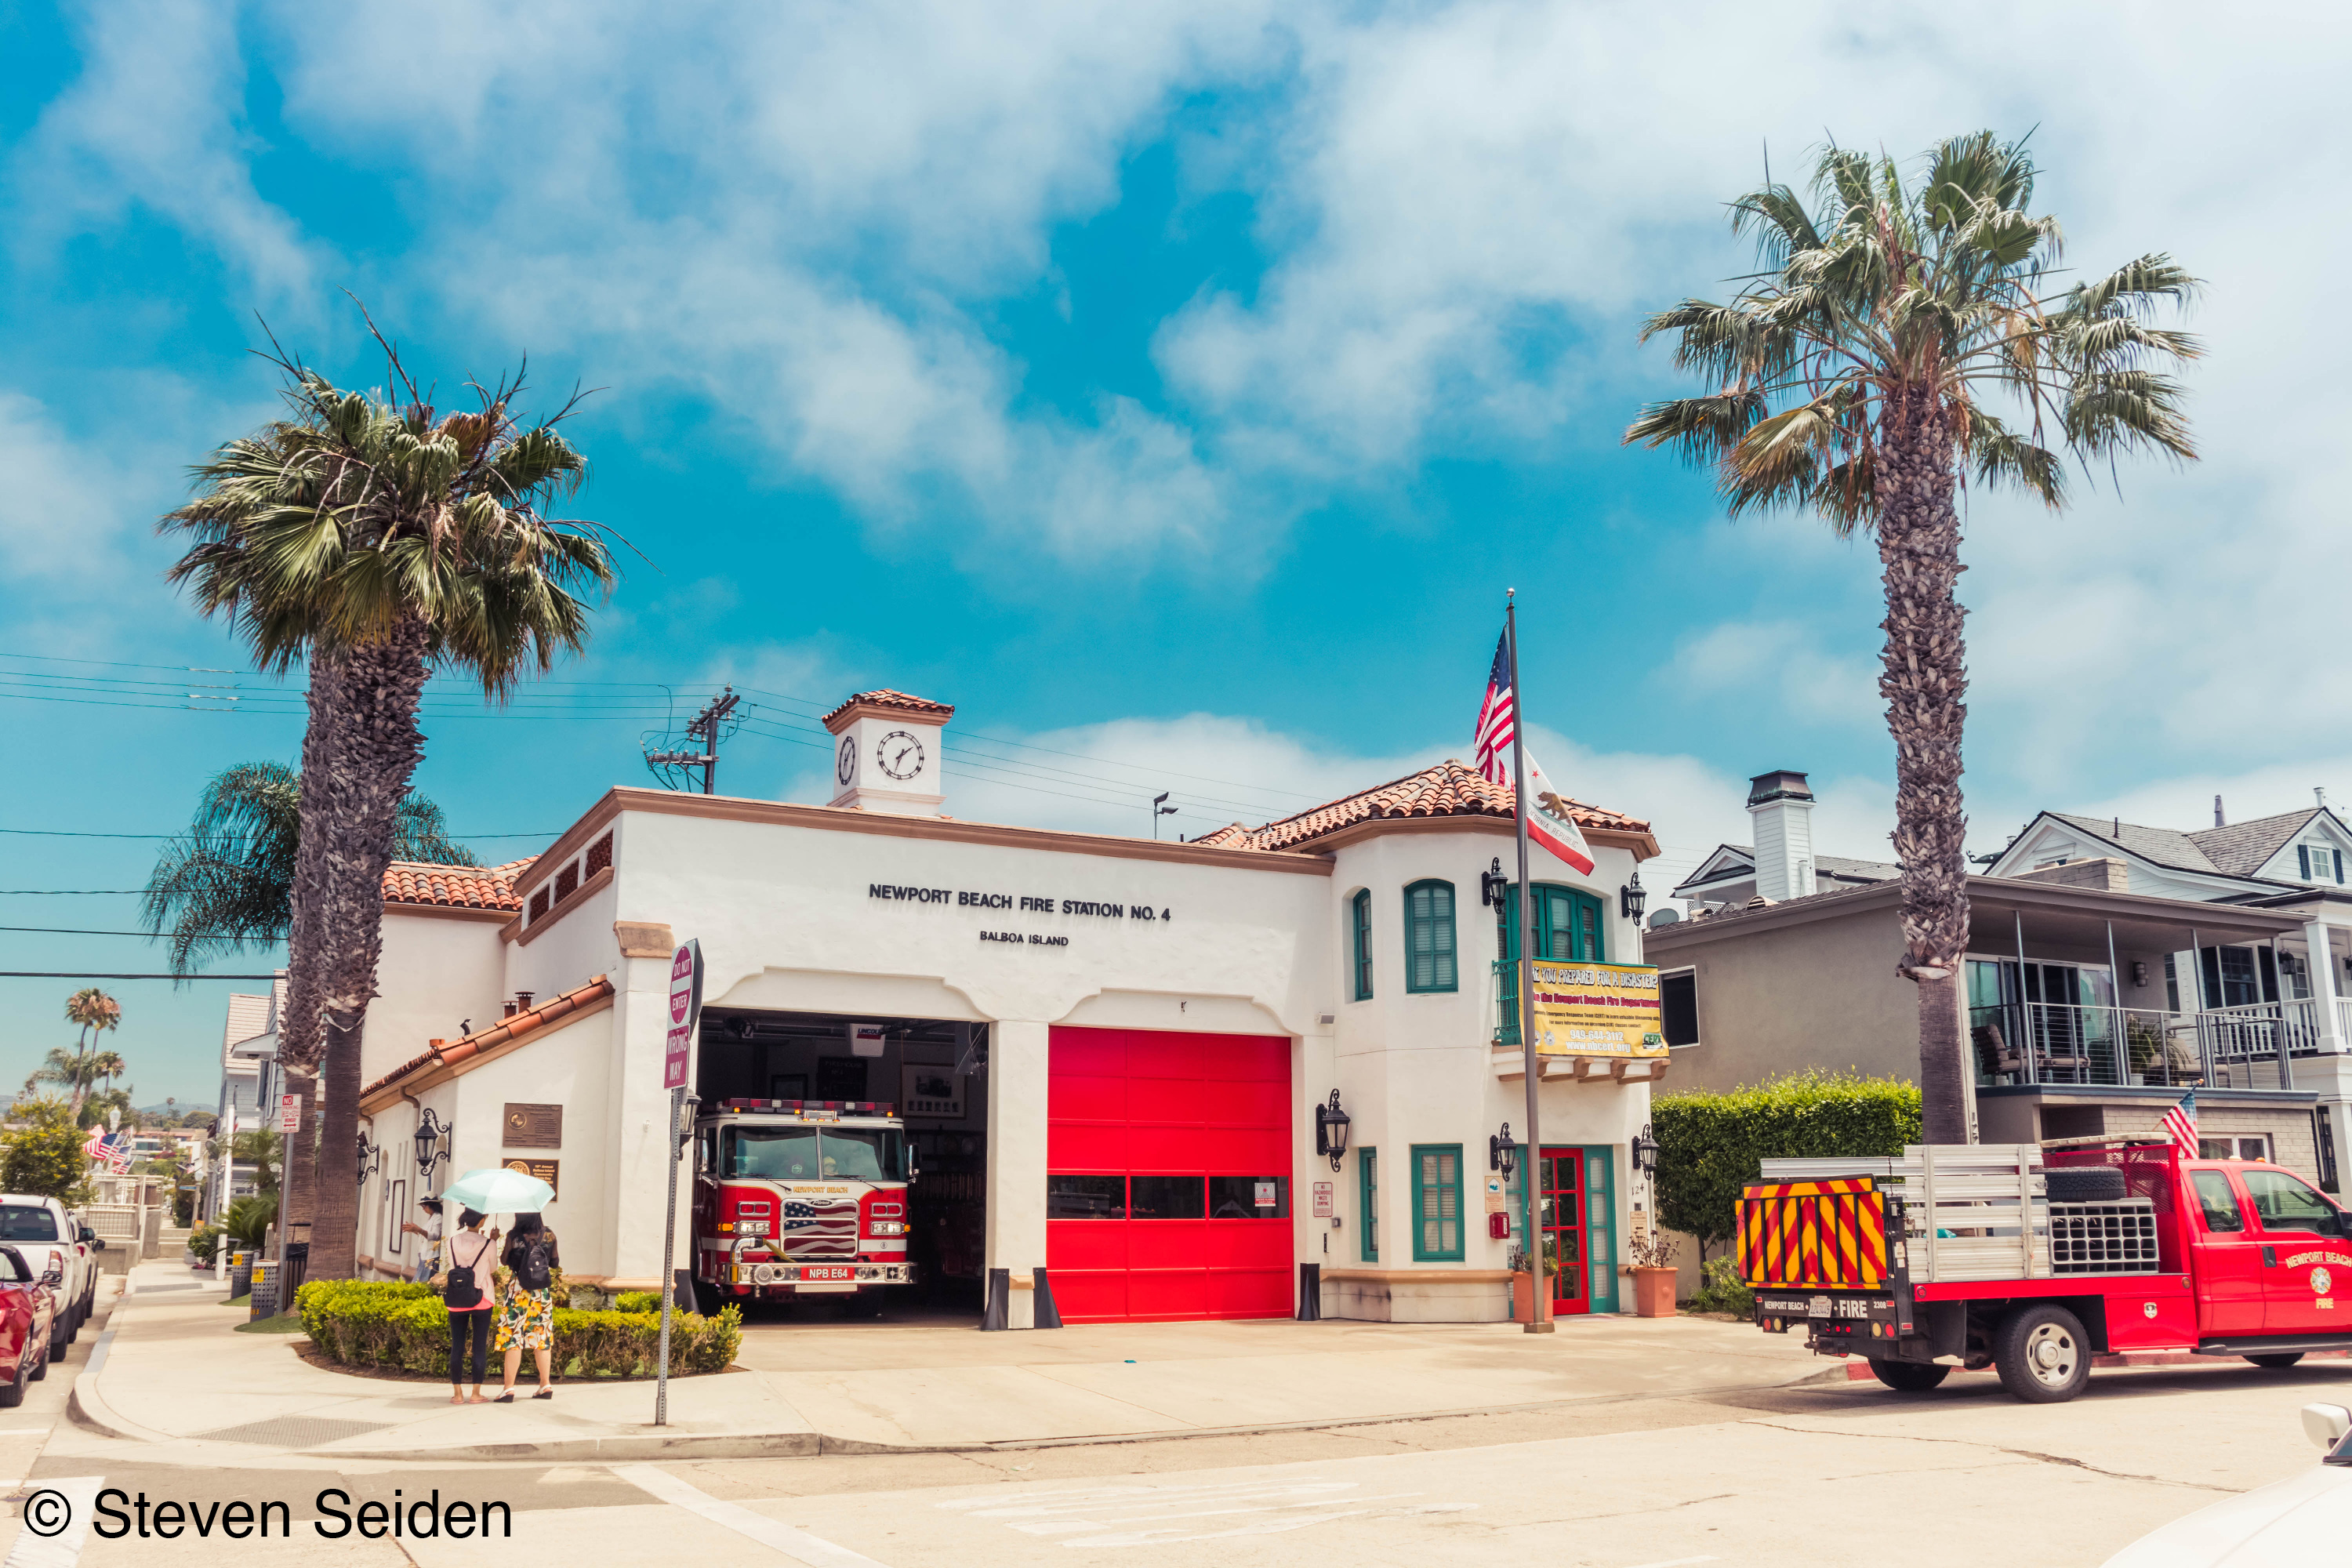 A picture of a firehouse.